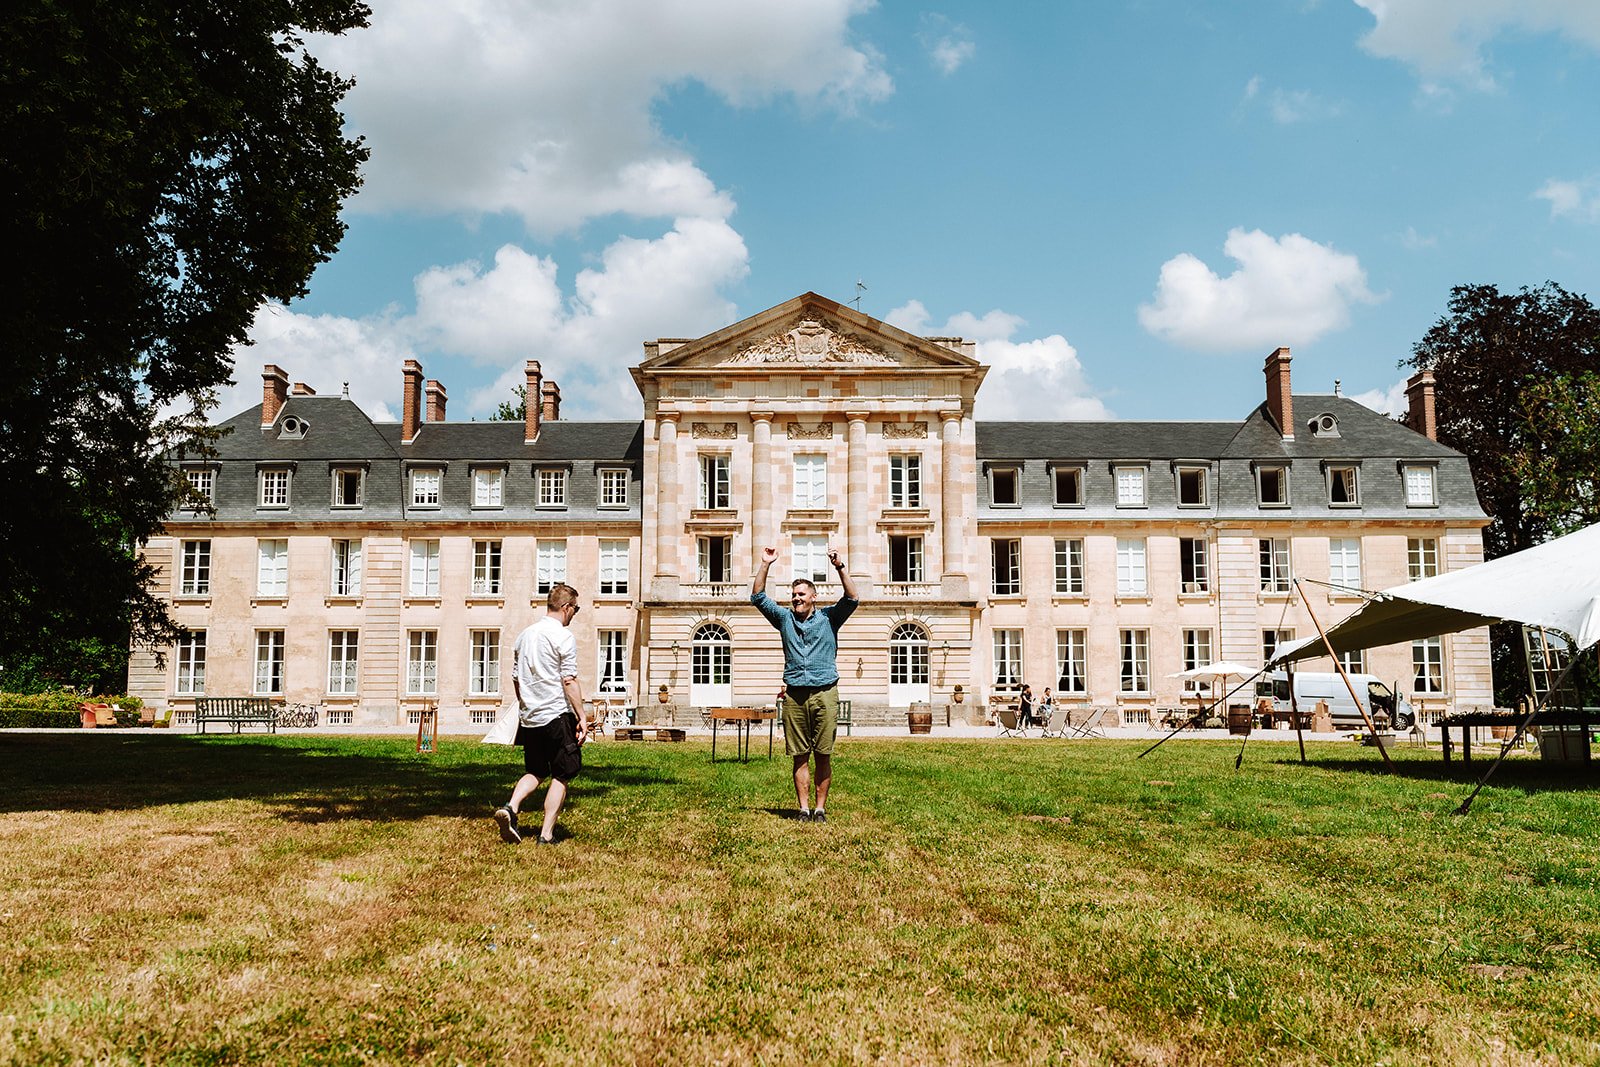 Two men enjoying a lawn game in front of a Chateau de Courtomer, a large French chateau for rent in Normandy.